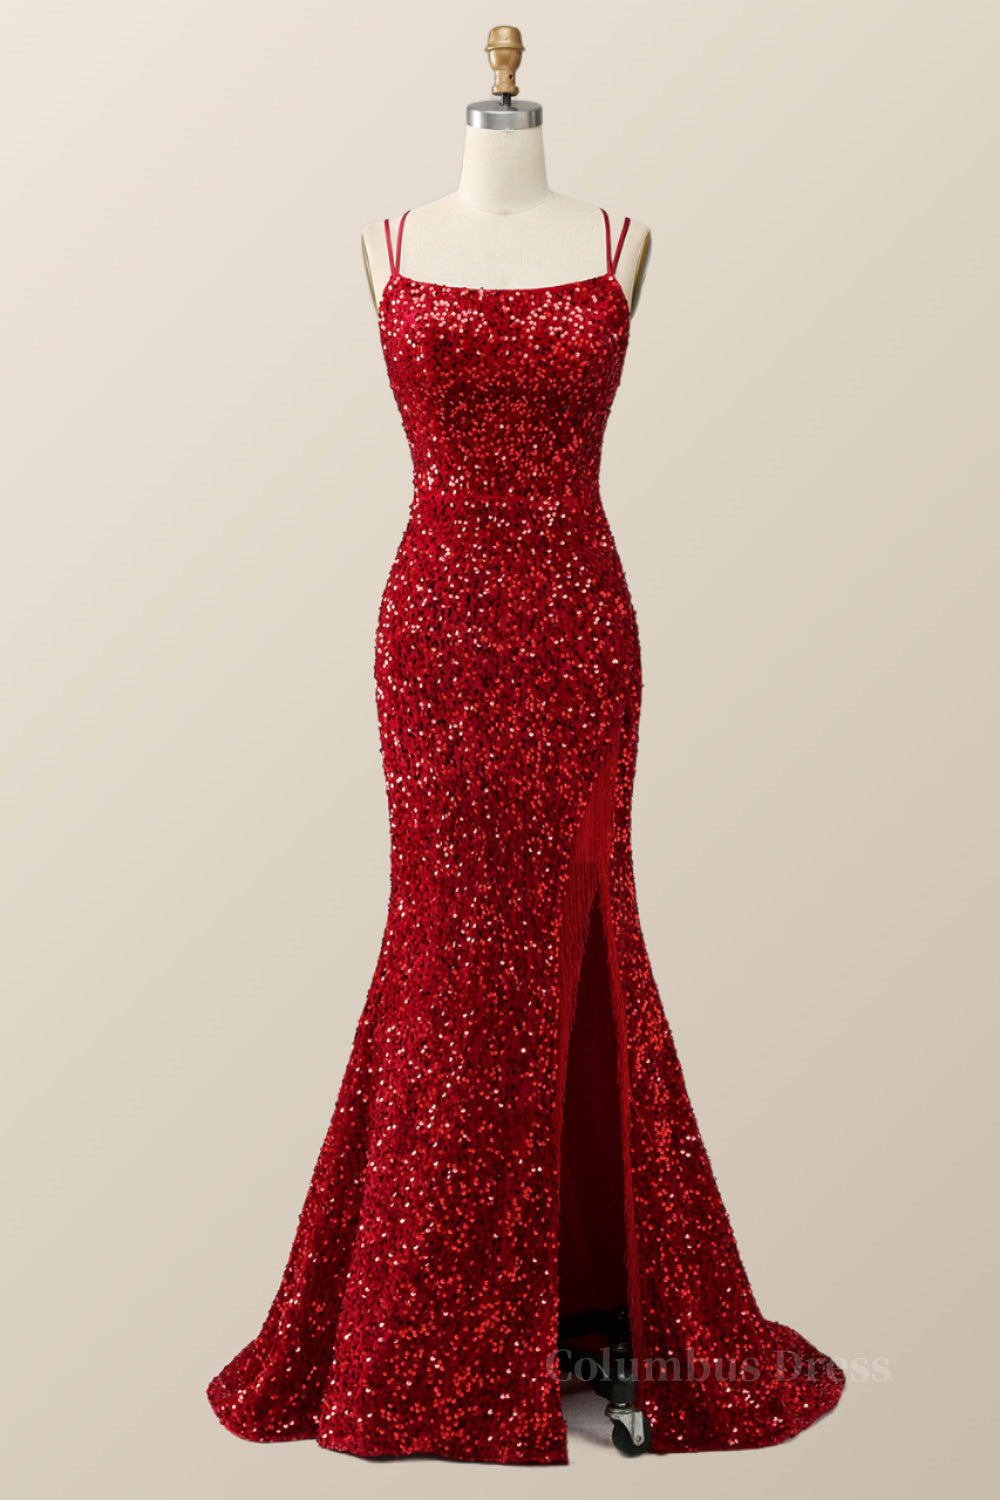 Party Dresses Night, Double Straps Red Sequin Mermaid Long Prom Dress